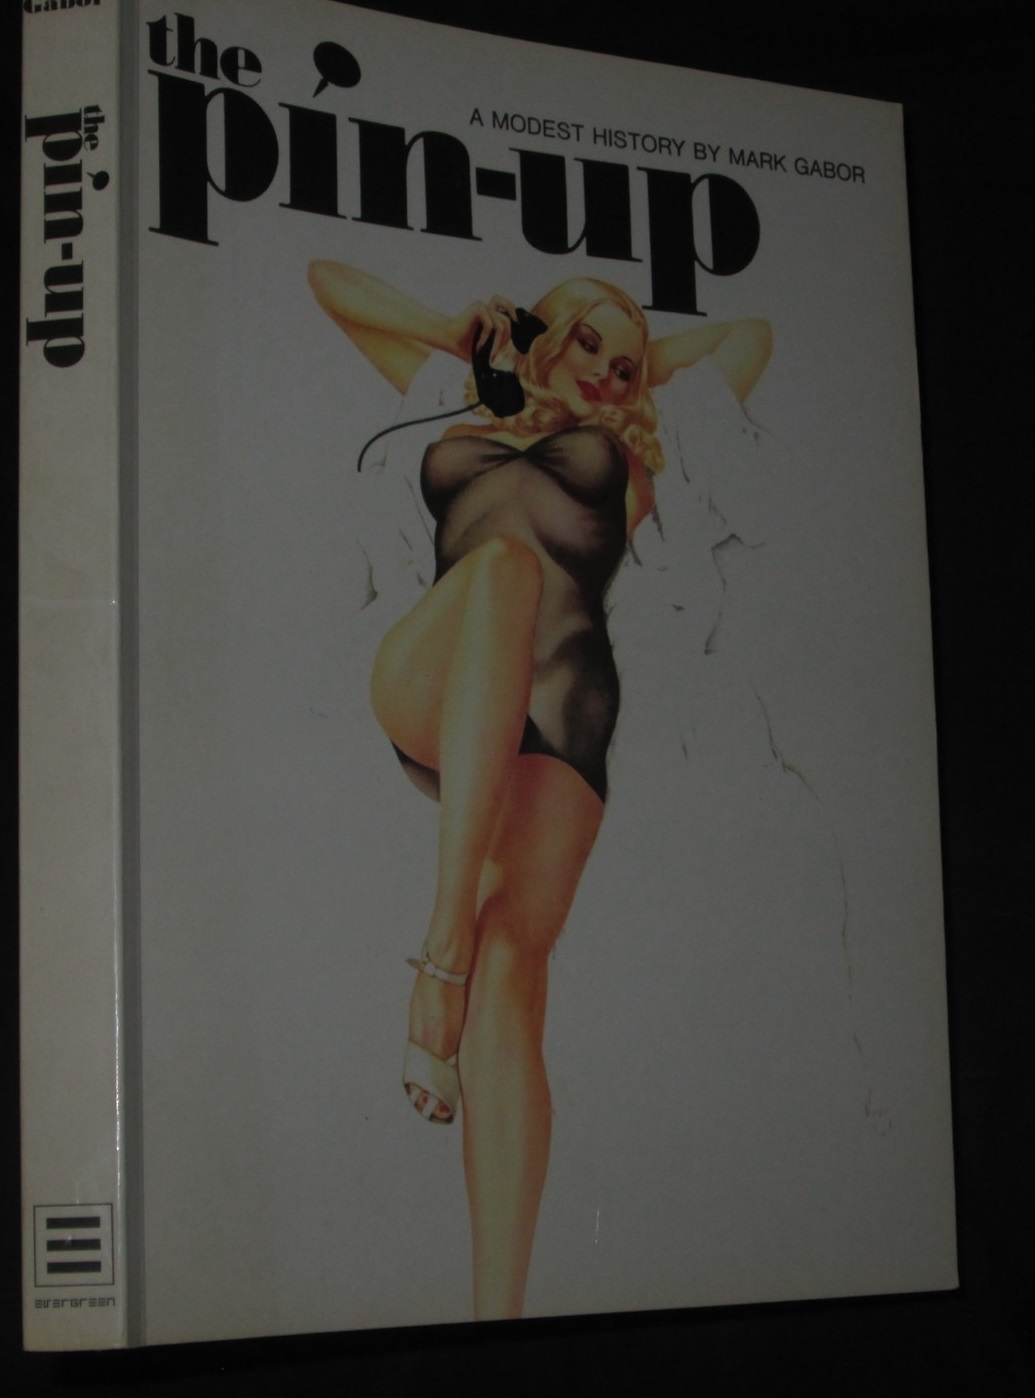 The Pin-up. A Modest History by Mark Gabor.